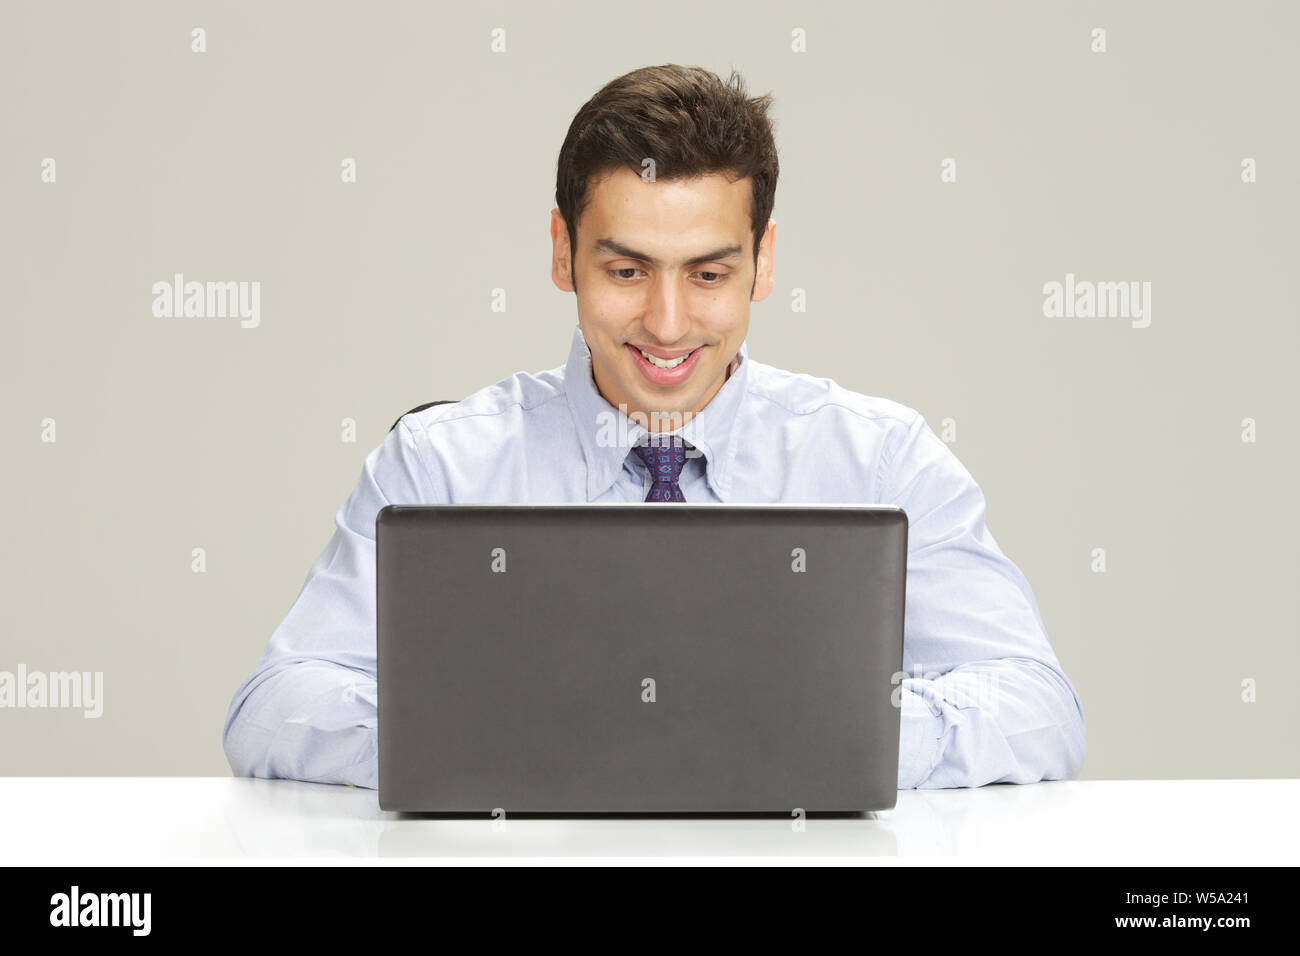 Businessman working on a laptop and smiling Stock Photo